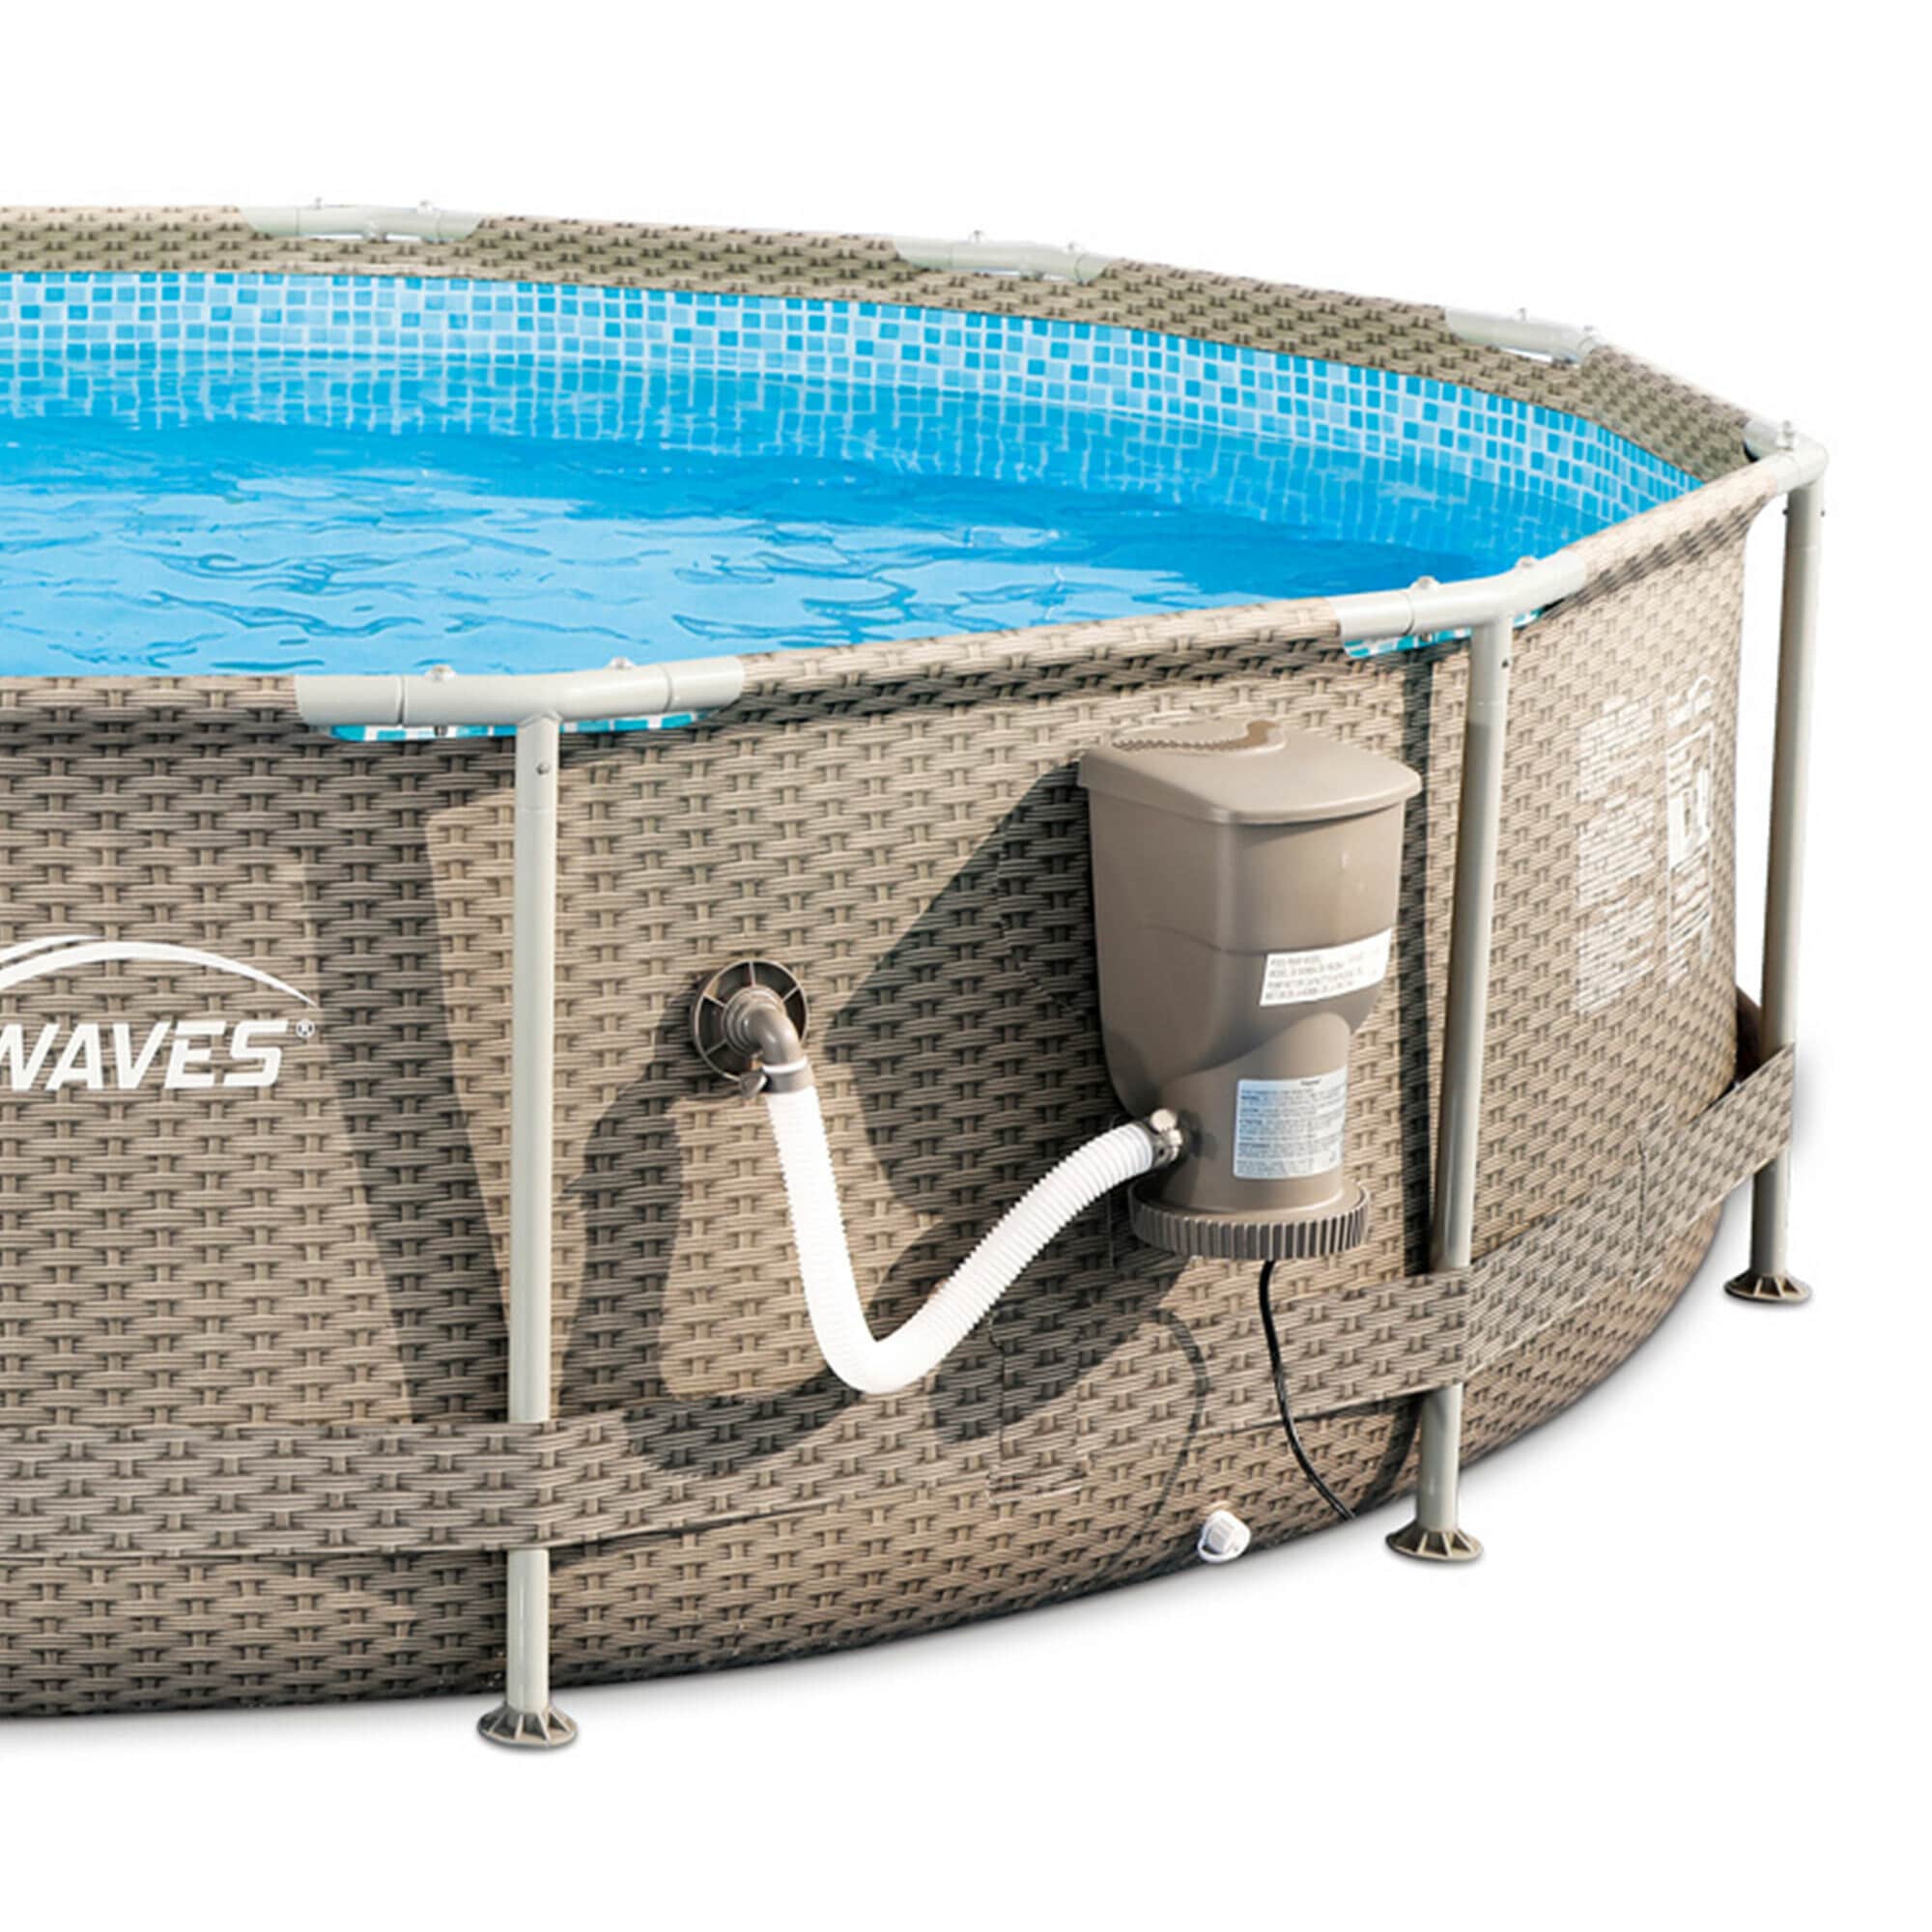 Summer Waves 12-ft x 12-ft Pool with Round Above-Ground Filter x Pump Frame at 30-in Metal